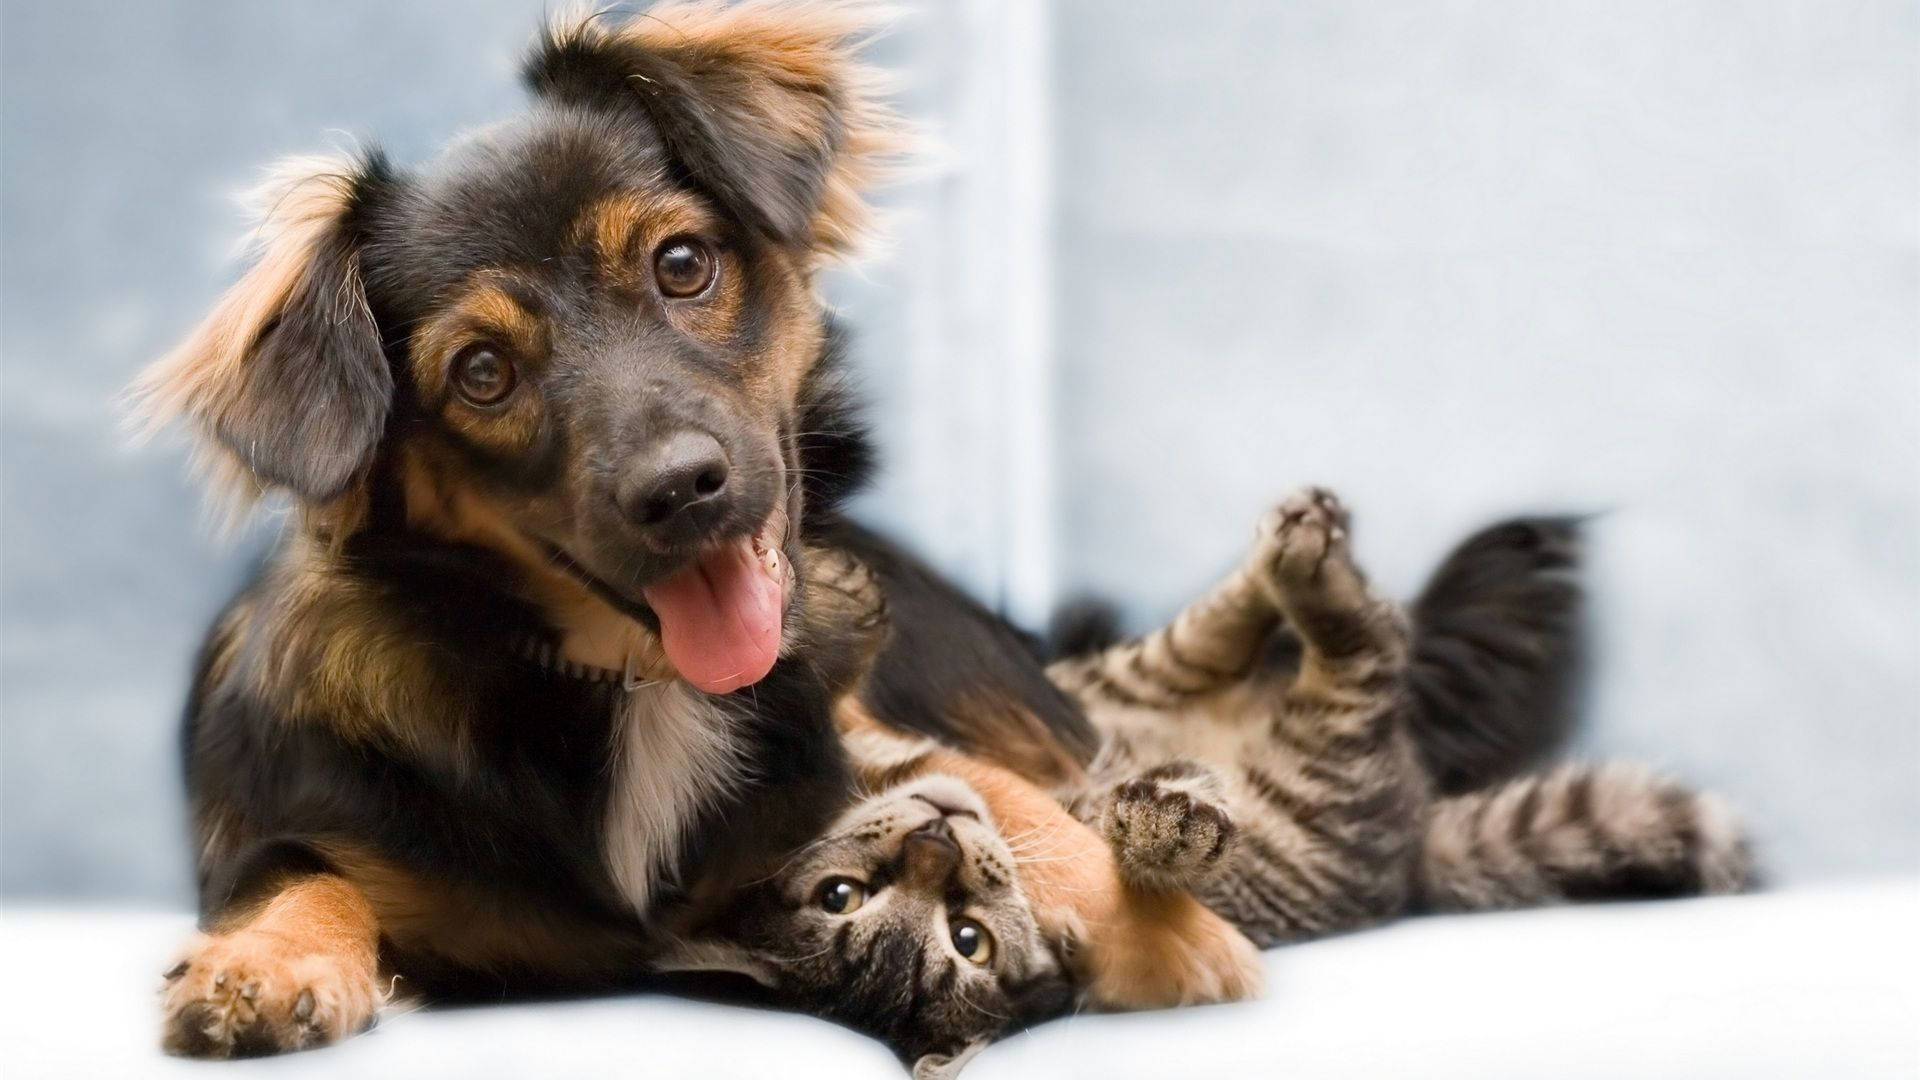 Dog And Cat Funny Animals Wallpaper